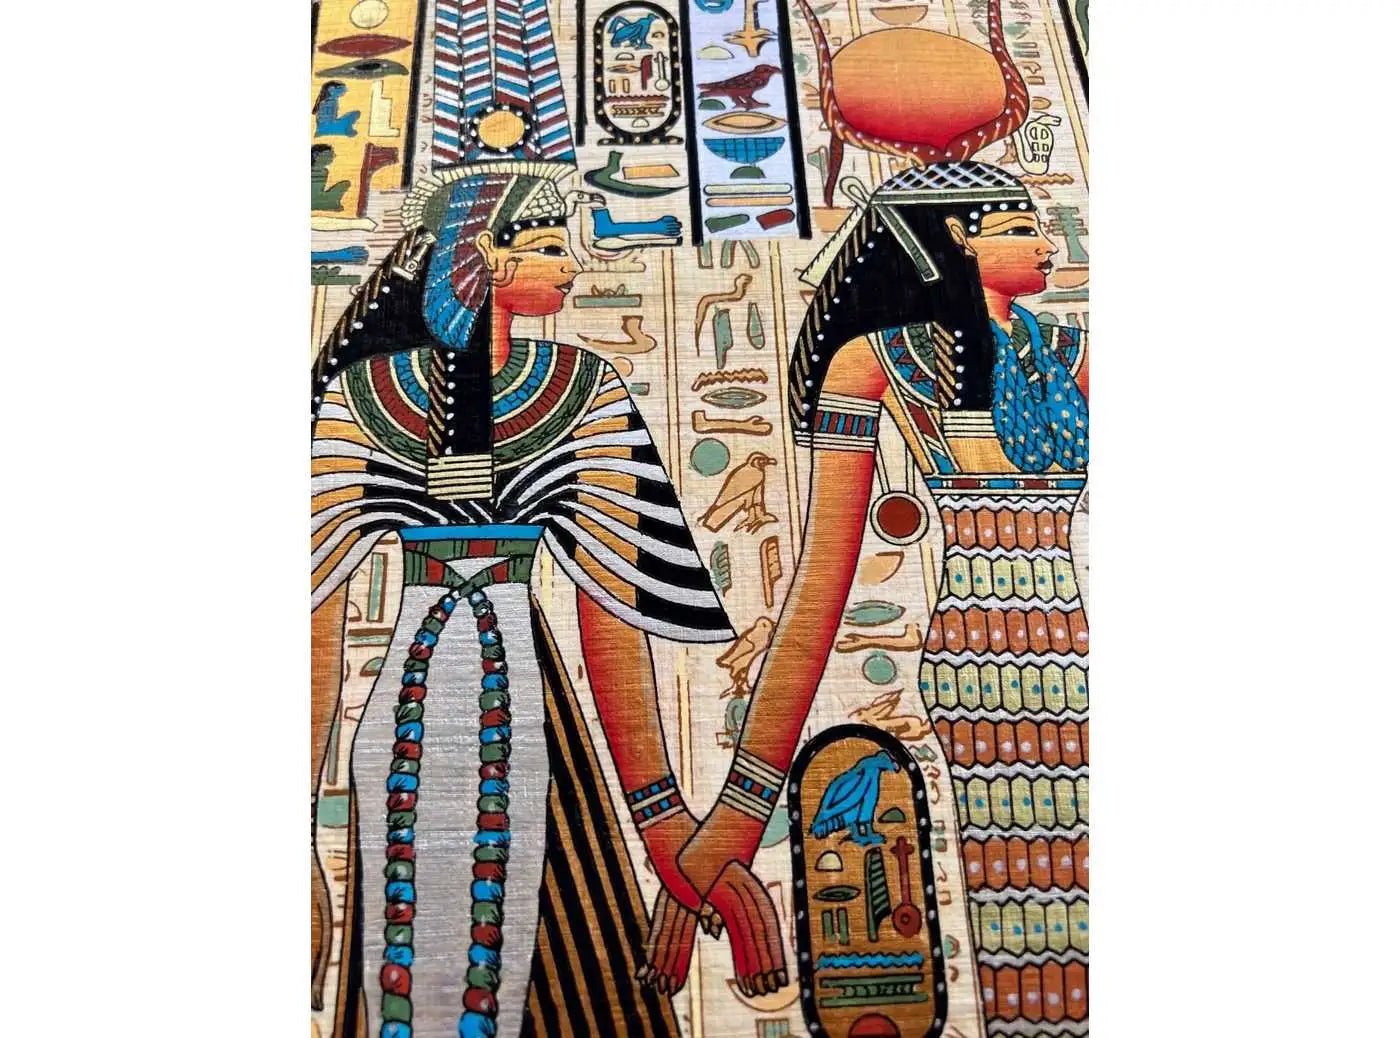 Goddess Isis Leading Queen Nefertari - Place in The Sacred Land Masterpiece Story - Egyptian Hand-Painted Papyrus Artwork - 13x17 Inches